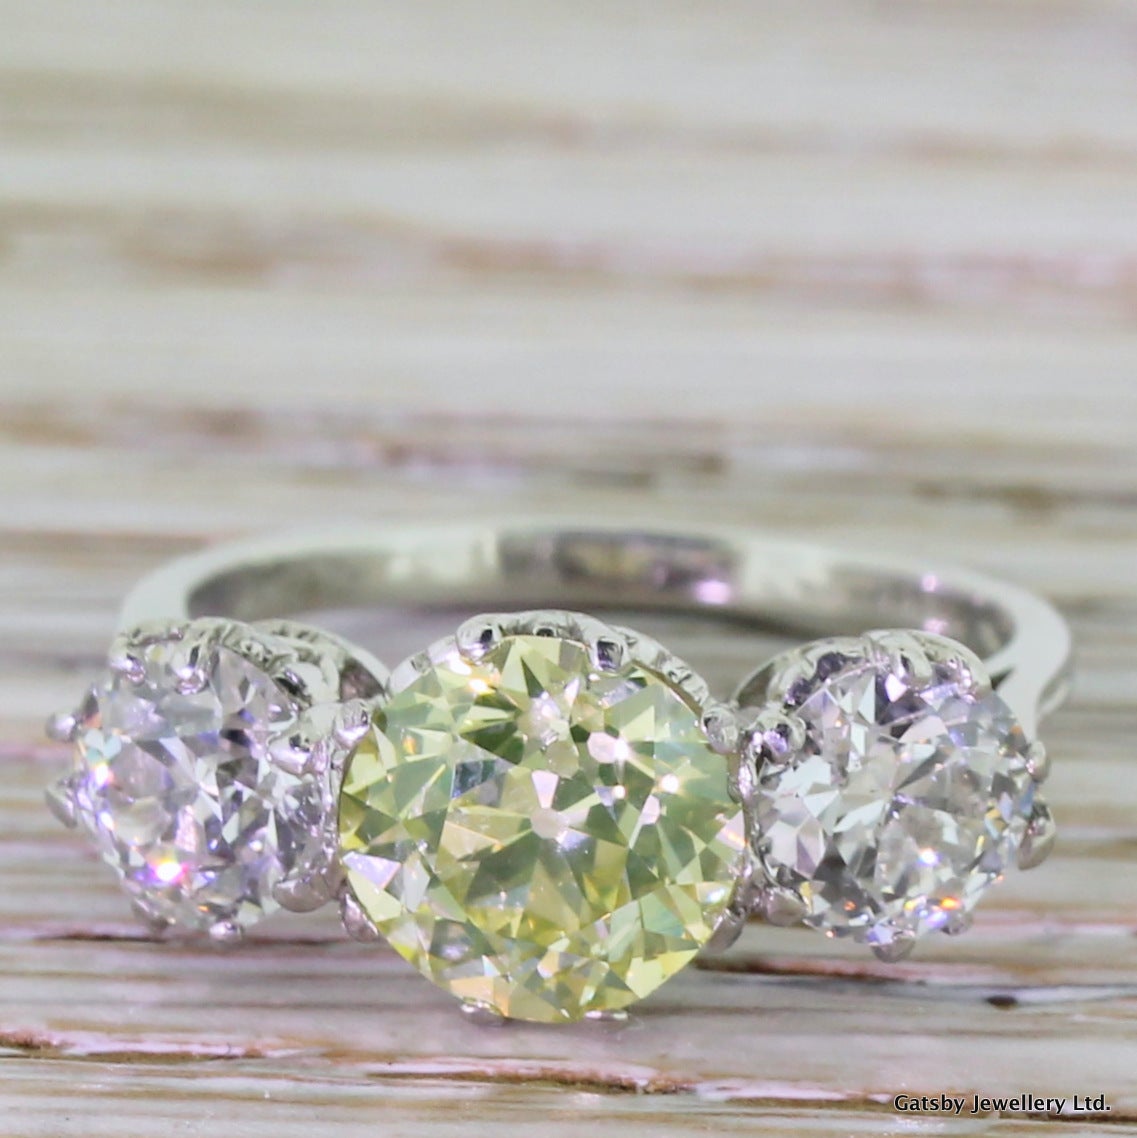 Throw any superlative at this ring, and it will stick. An impossibly rare greenish yellow old cut diamond - weighing just under 2.00 carat - flanked by a pair of colourless white diamonds. For a ring with so much diamond weight, this is a very easy